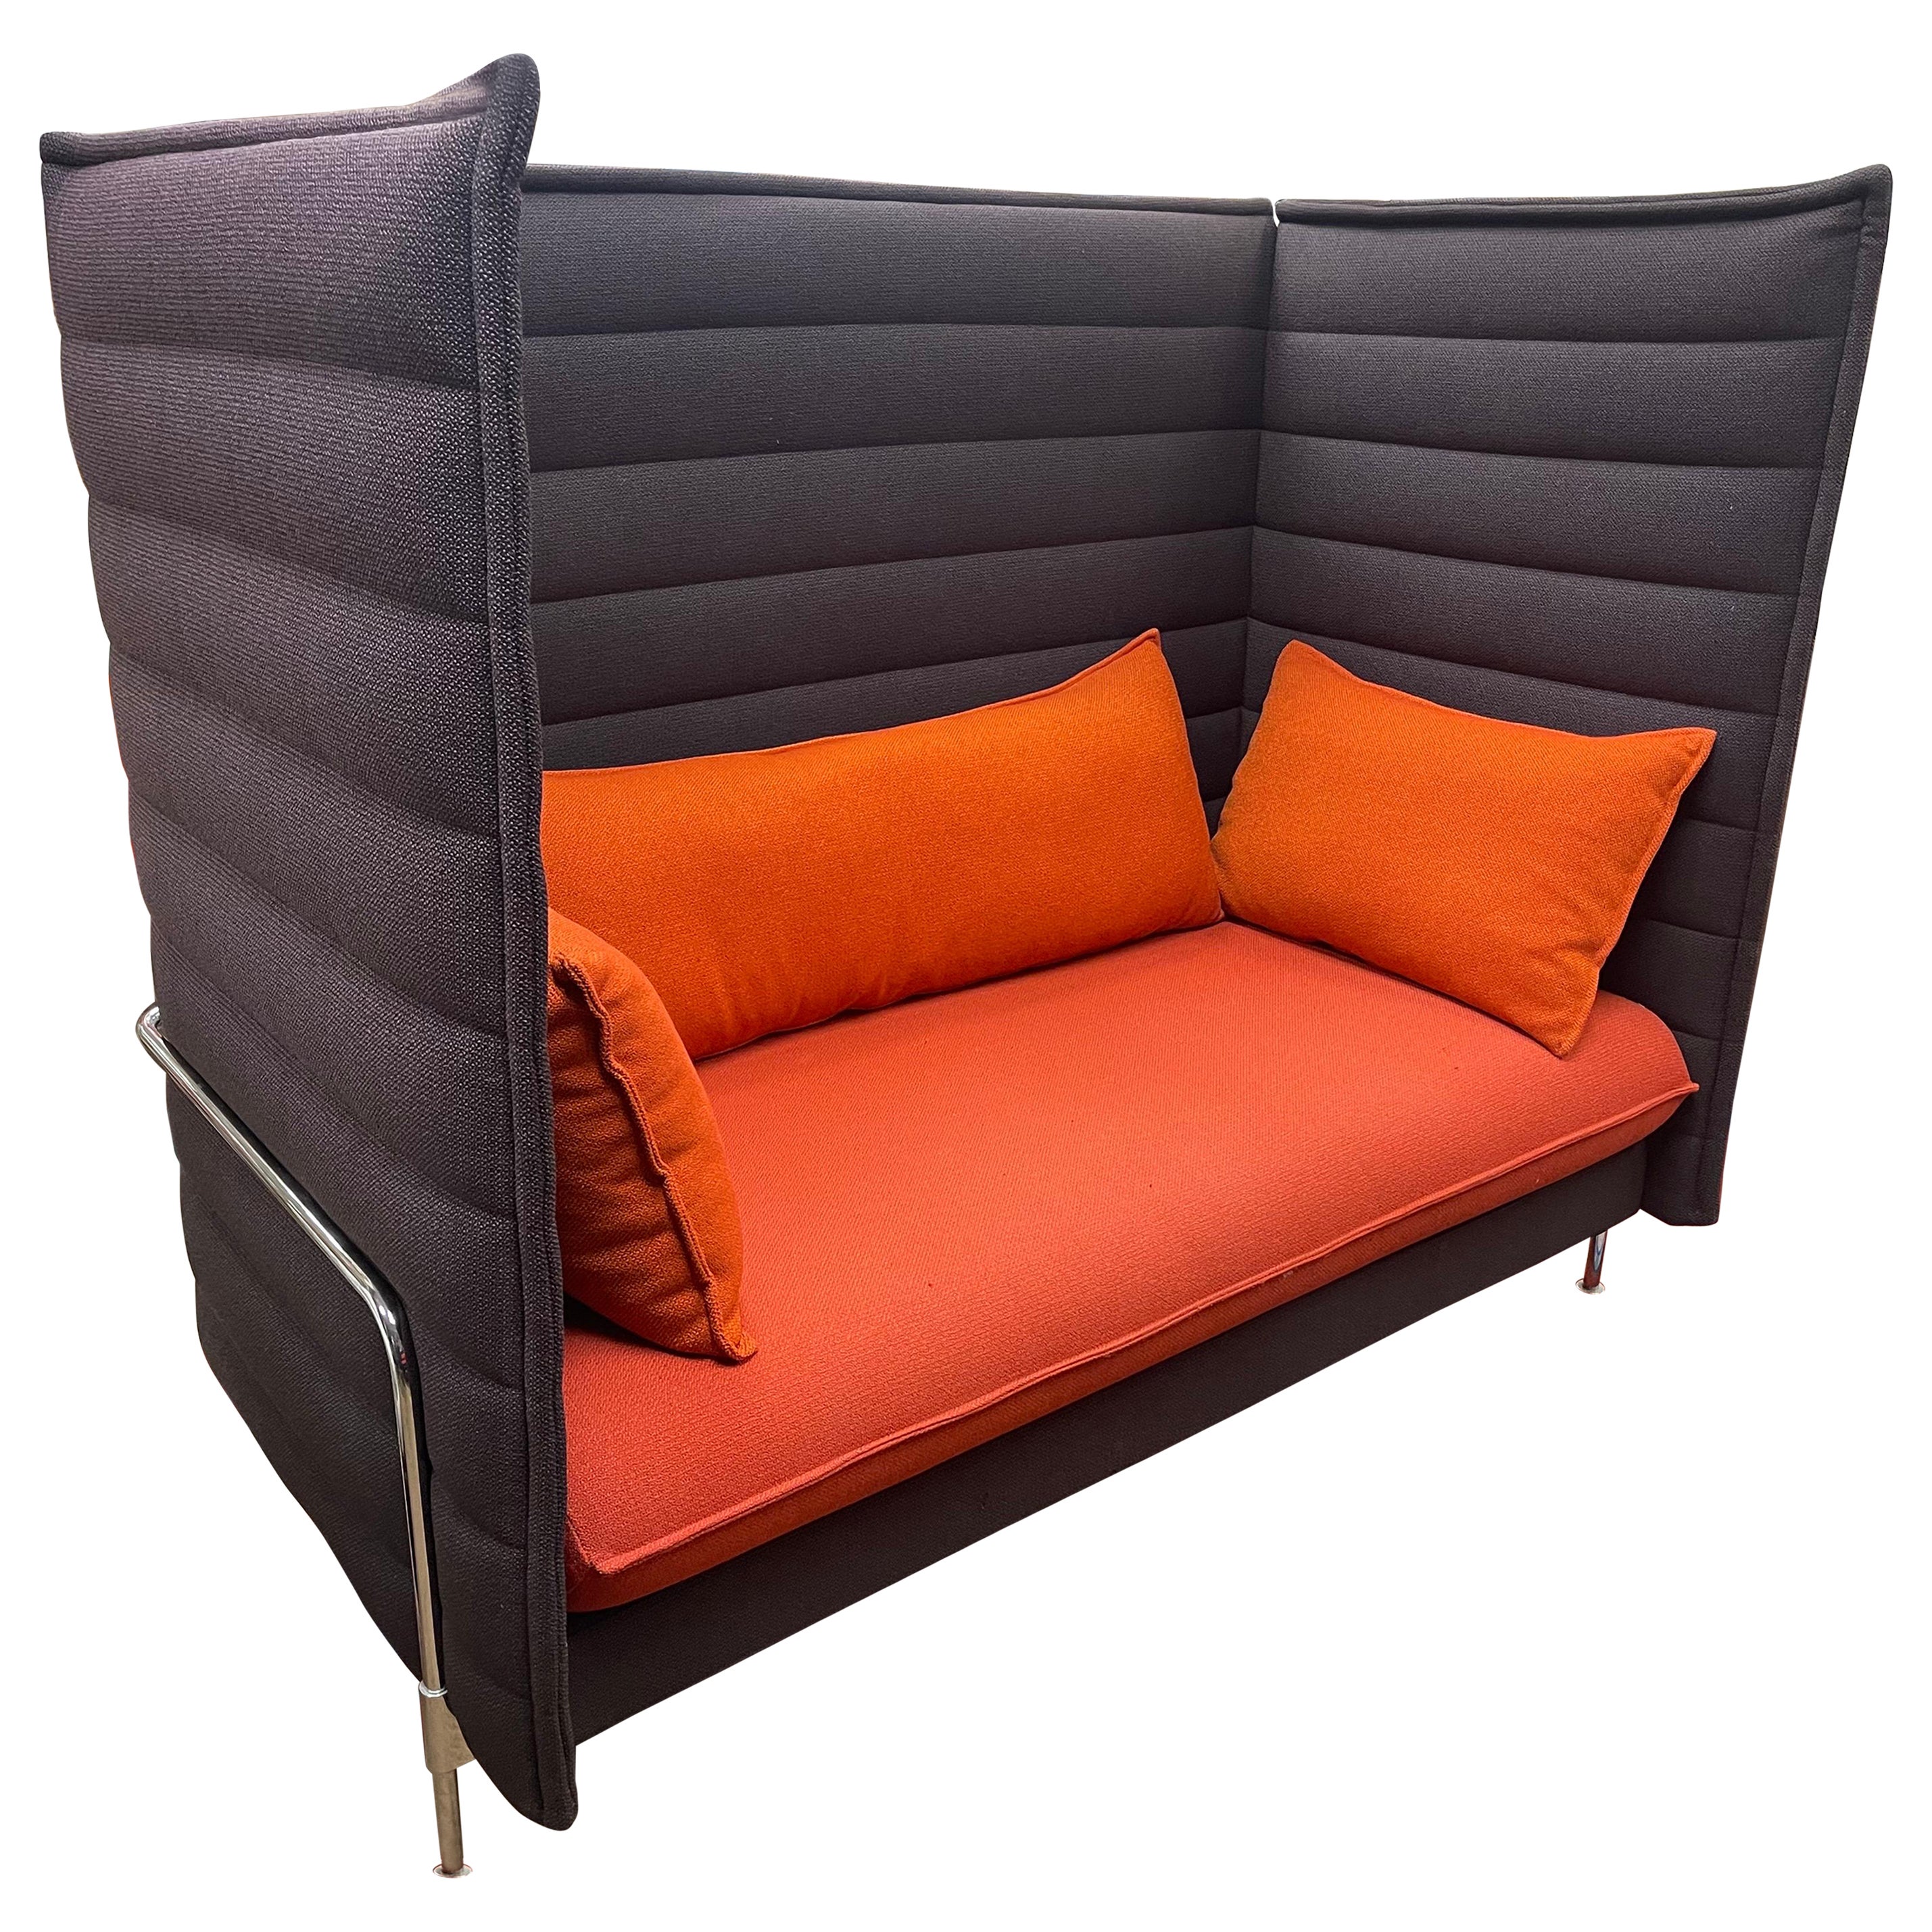 Vitra Coveted Alcove High Back Sofa by Ronan & Erwan Bouroullec 2008 For Sale